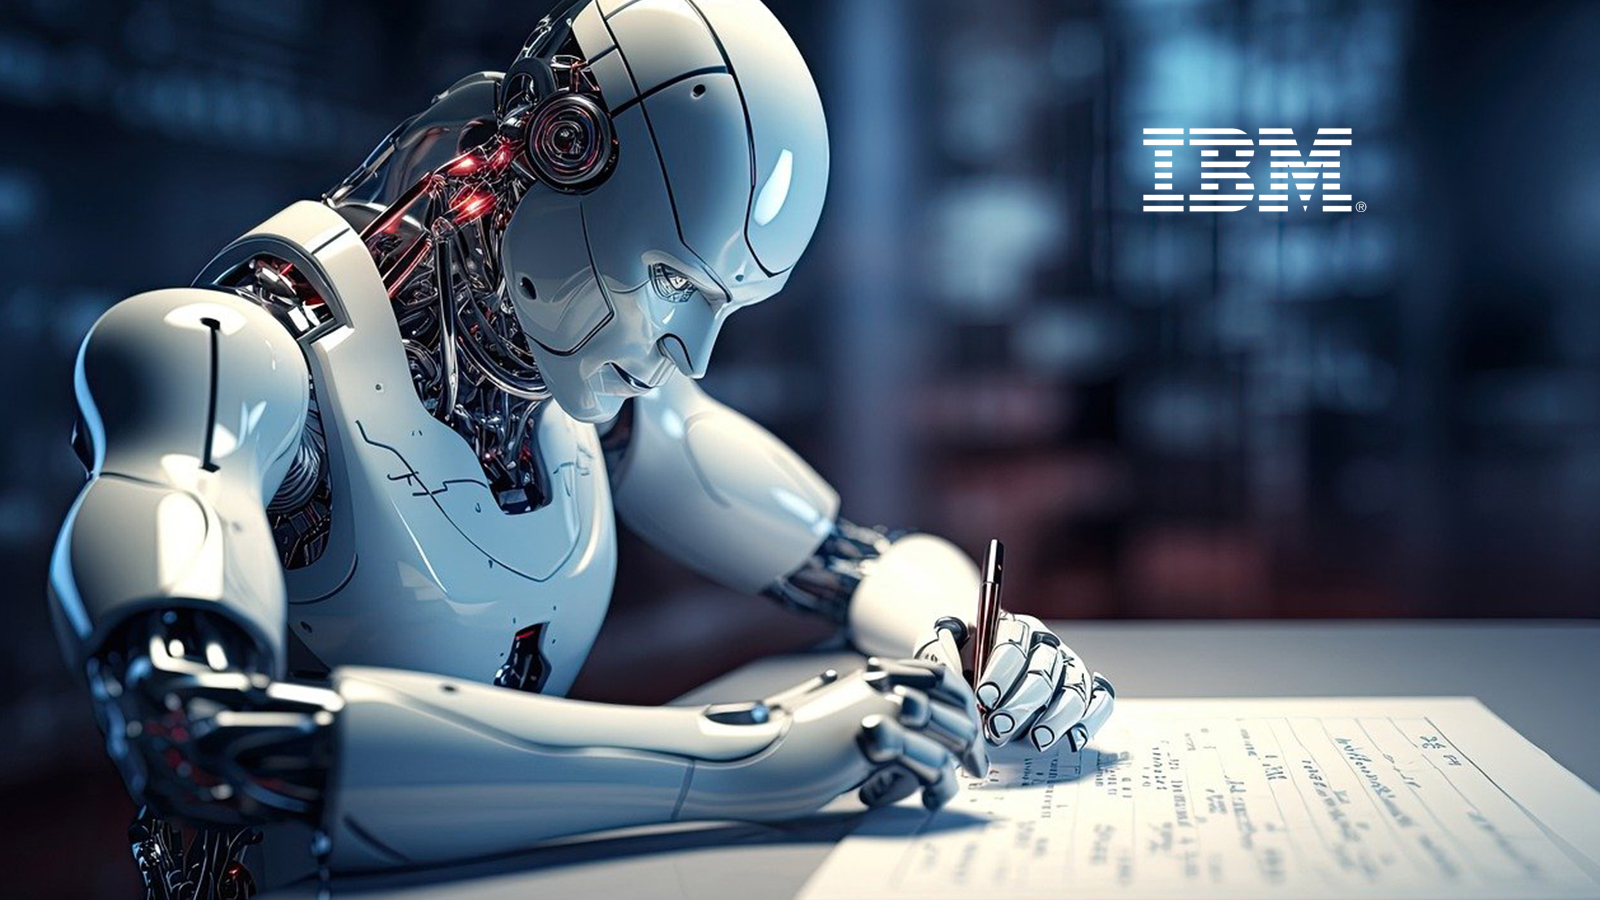 IBM Study Retail Experiences Widely Dissatisfied, Consumers Want AI-Driven Shopping During Economic Struggle